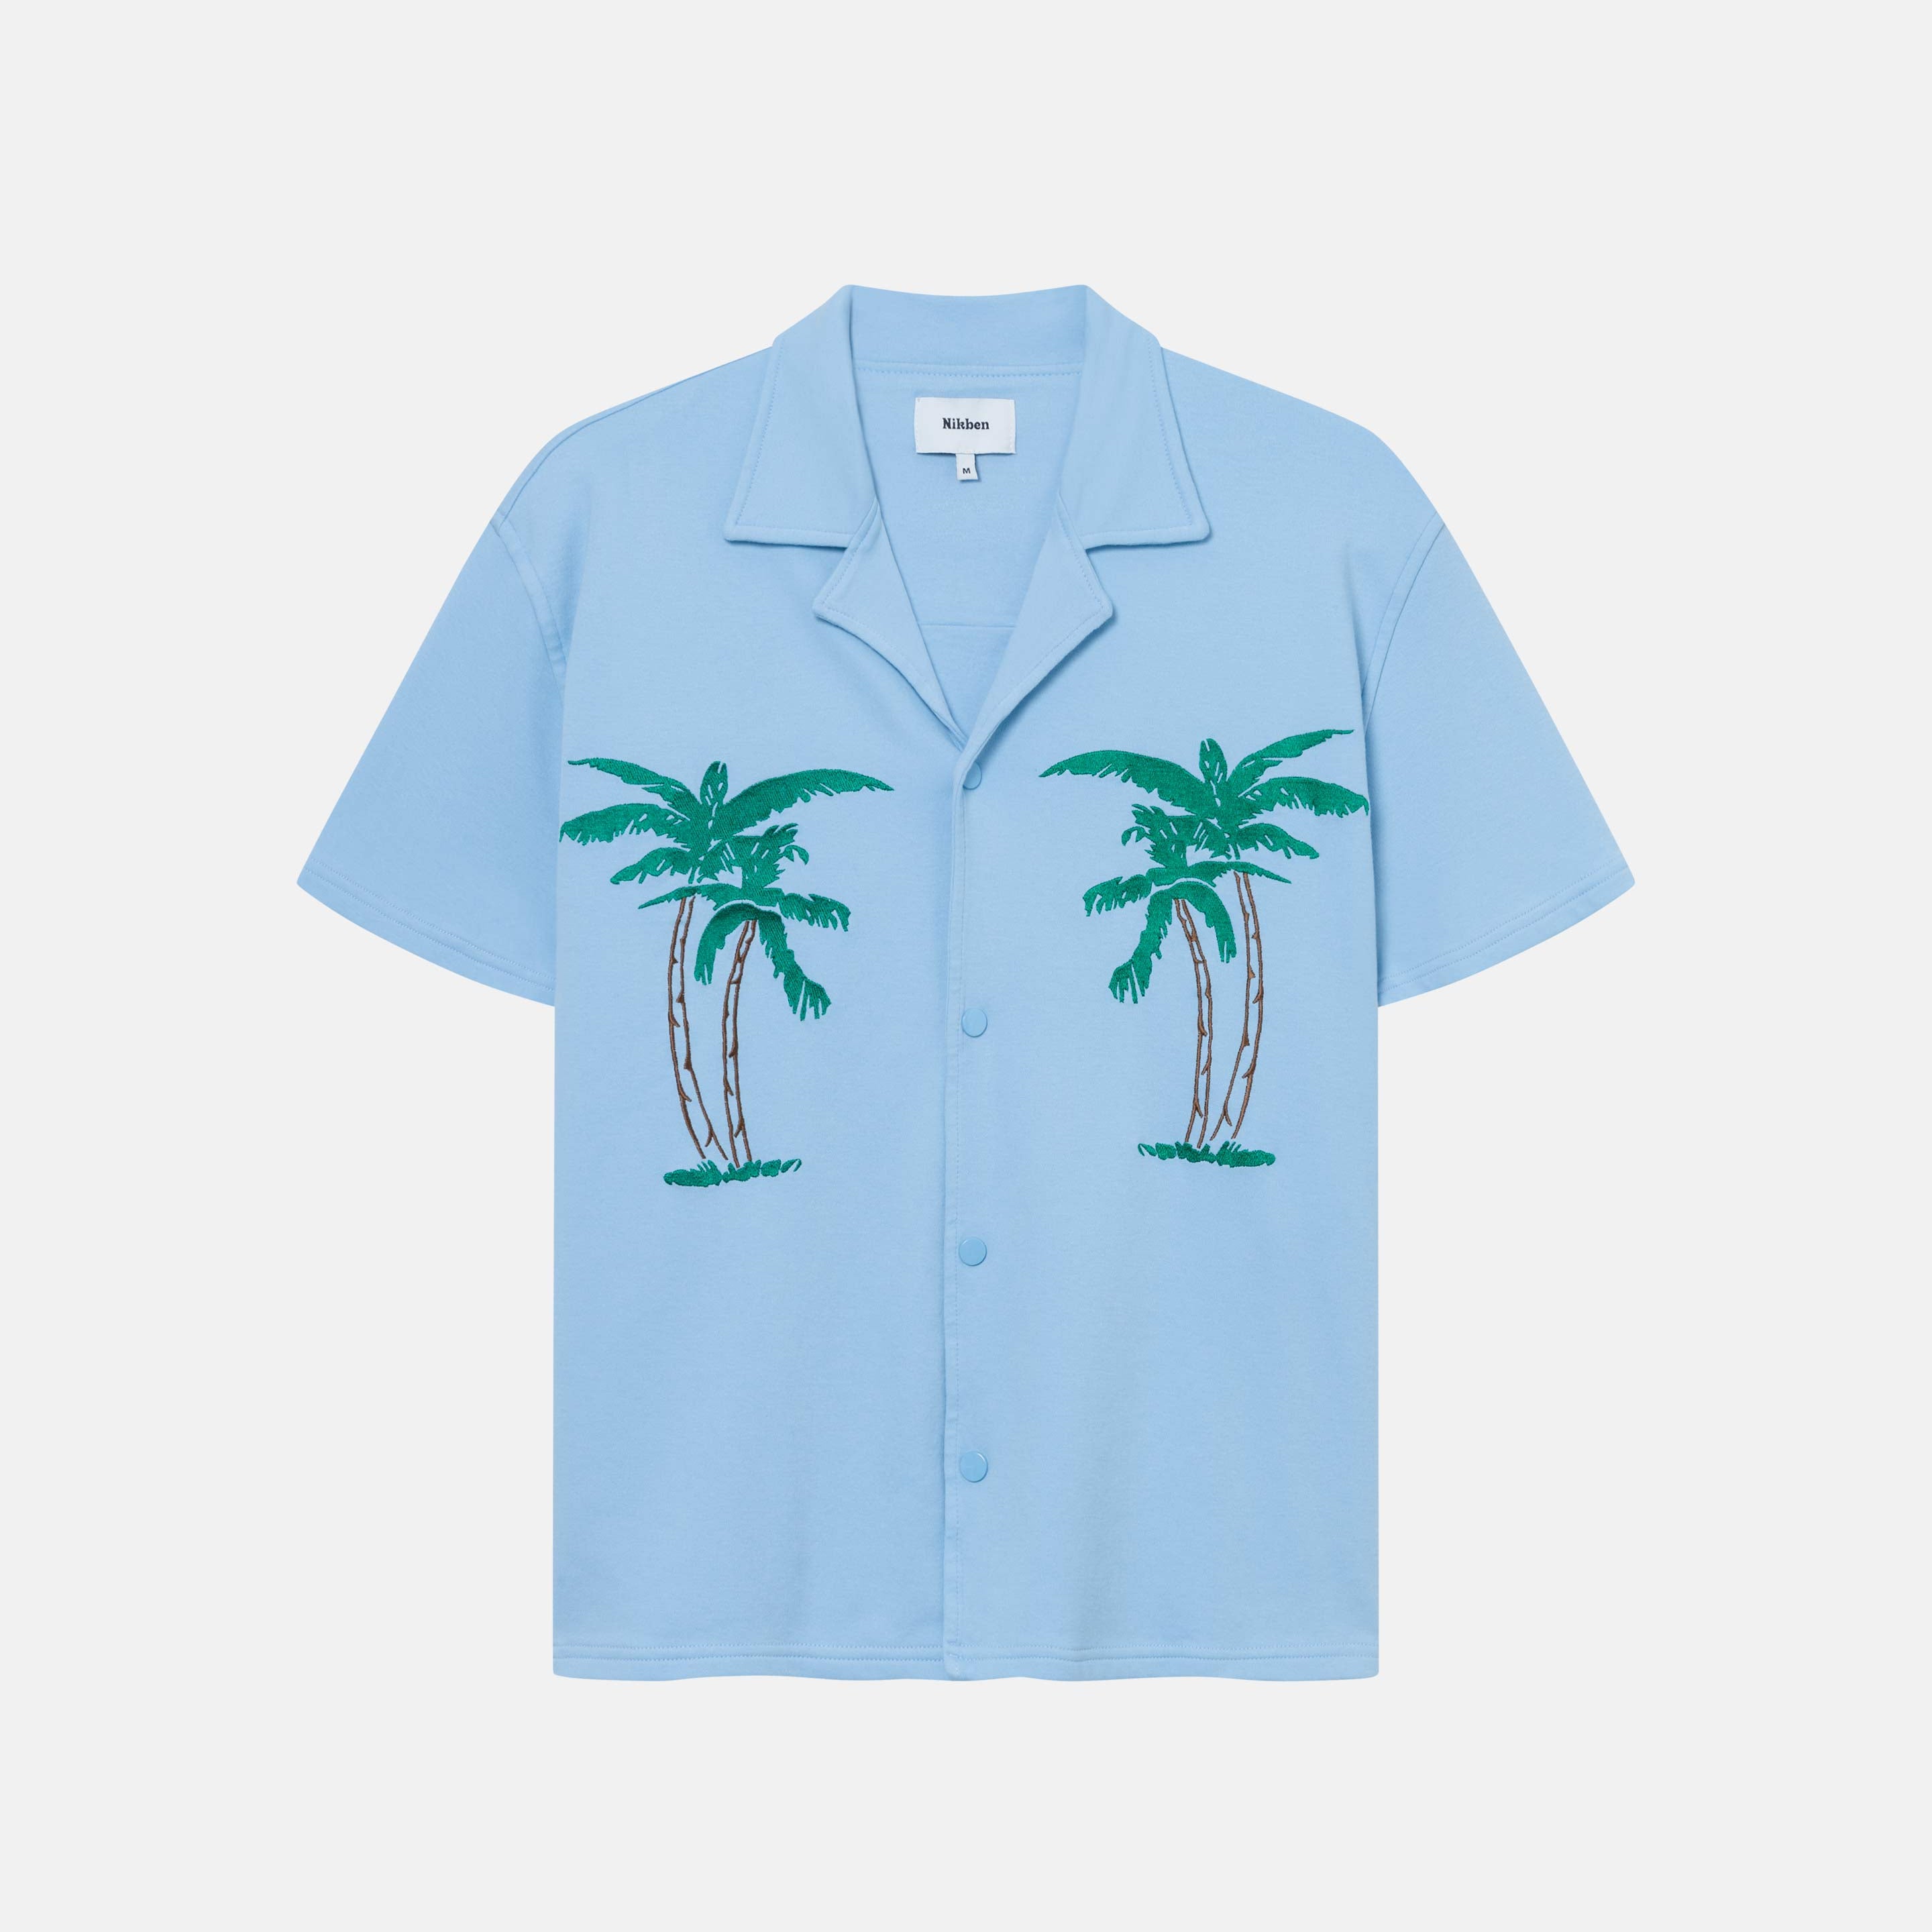 Sky blue short-sleeved shirt with palm tree embroidery